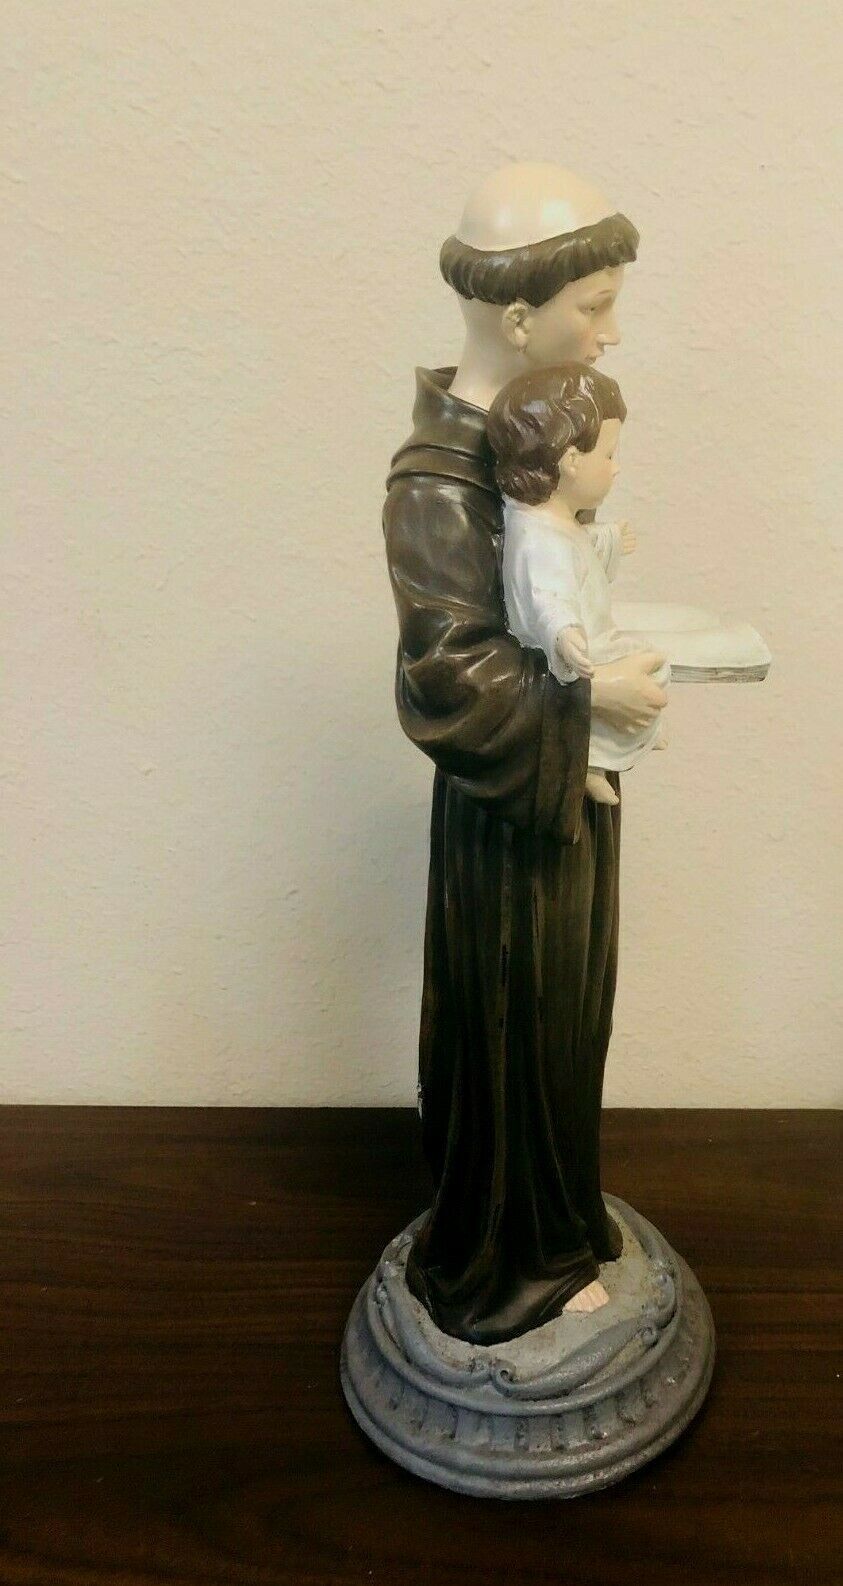 Saint Anthony of Padua Statue 19.75" H, New - Bob and Penny Lord